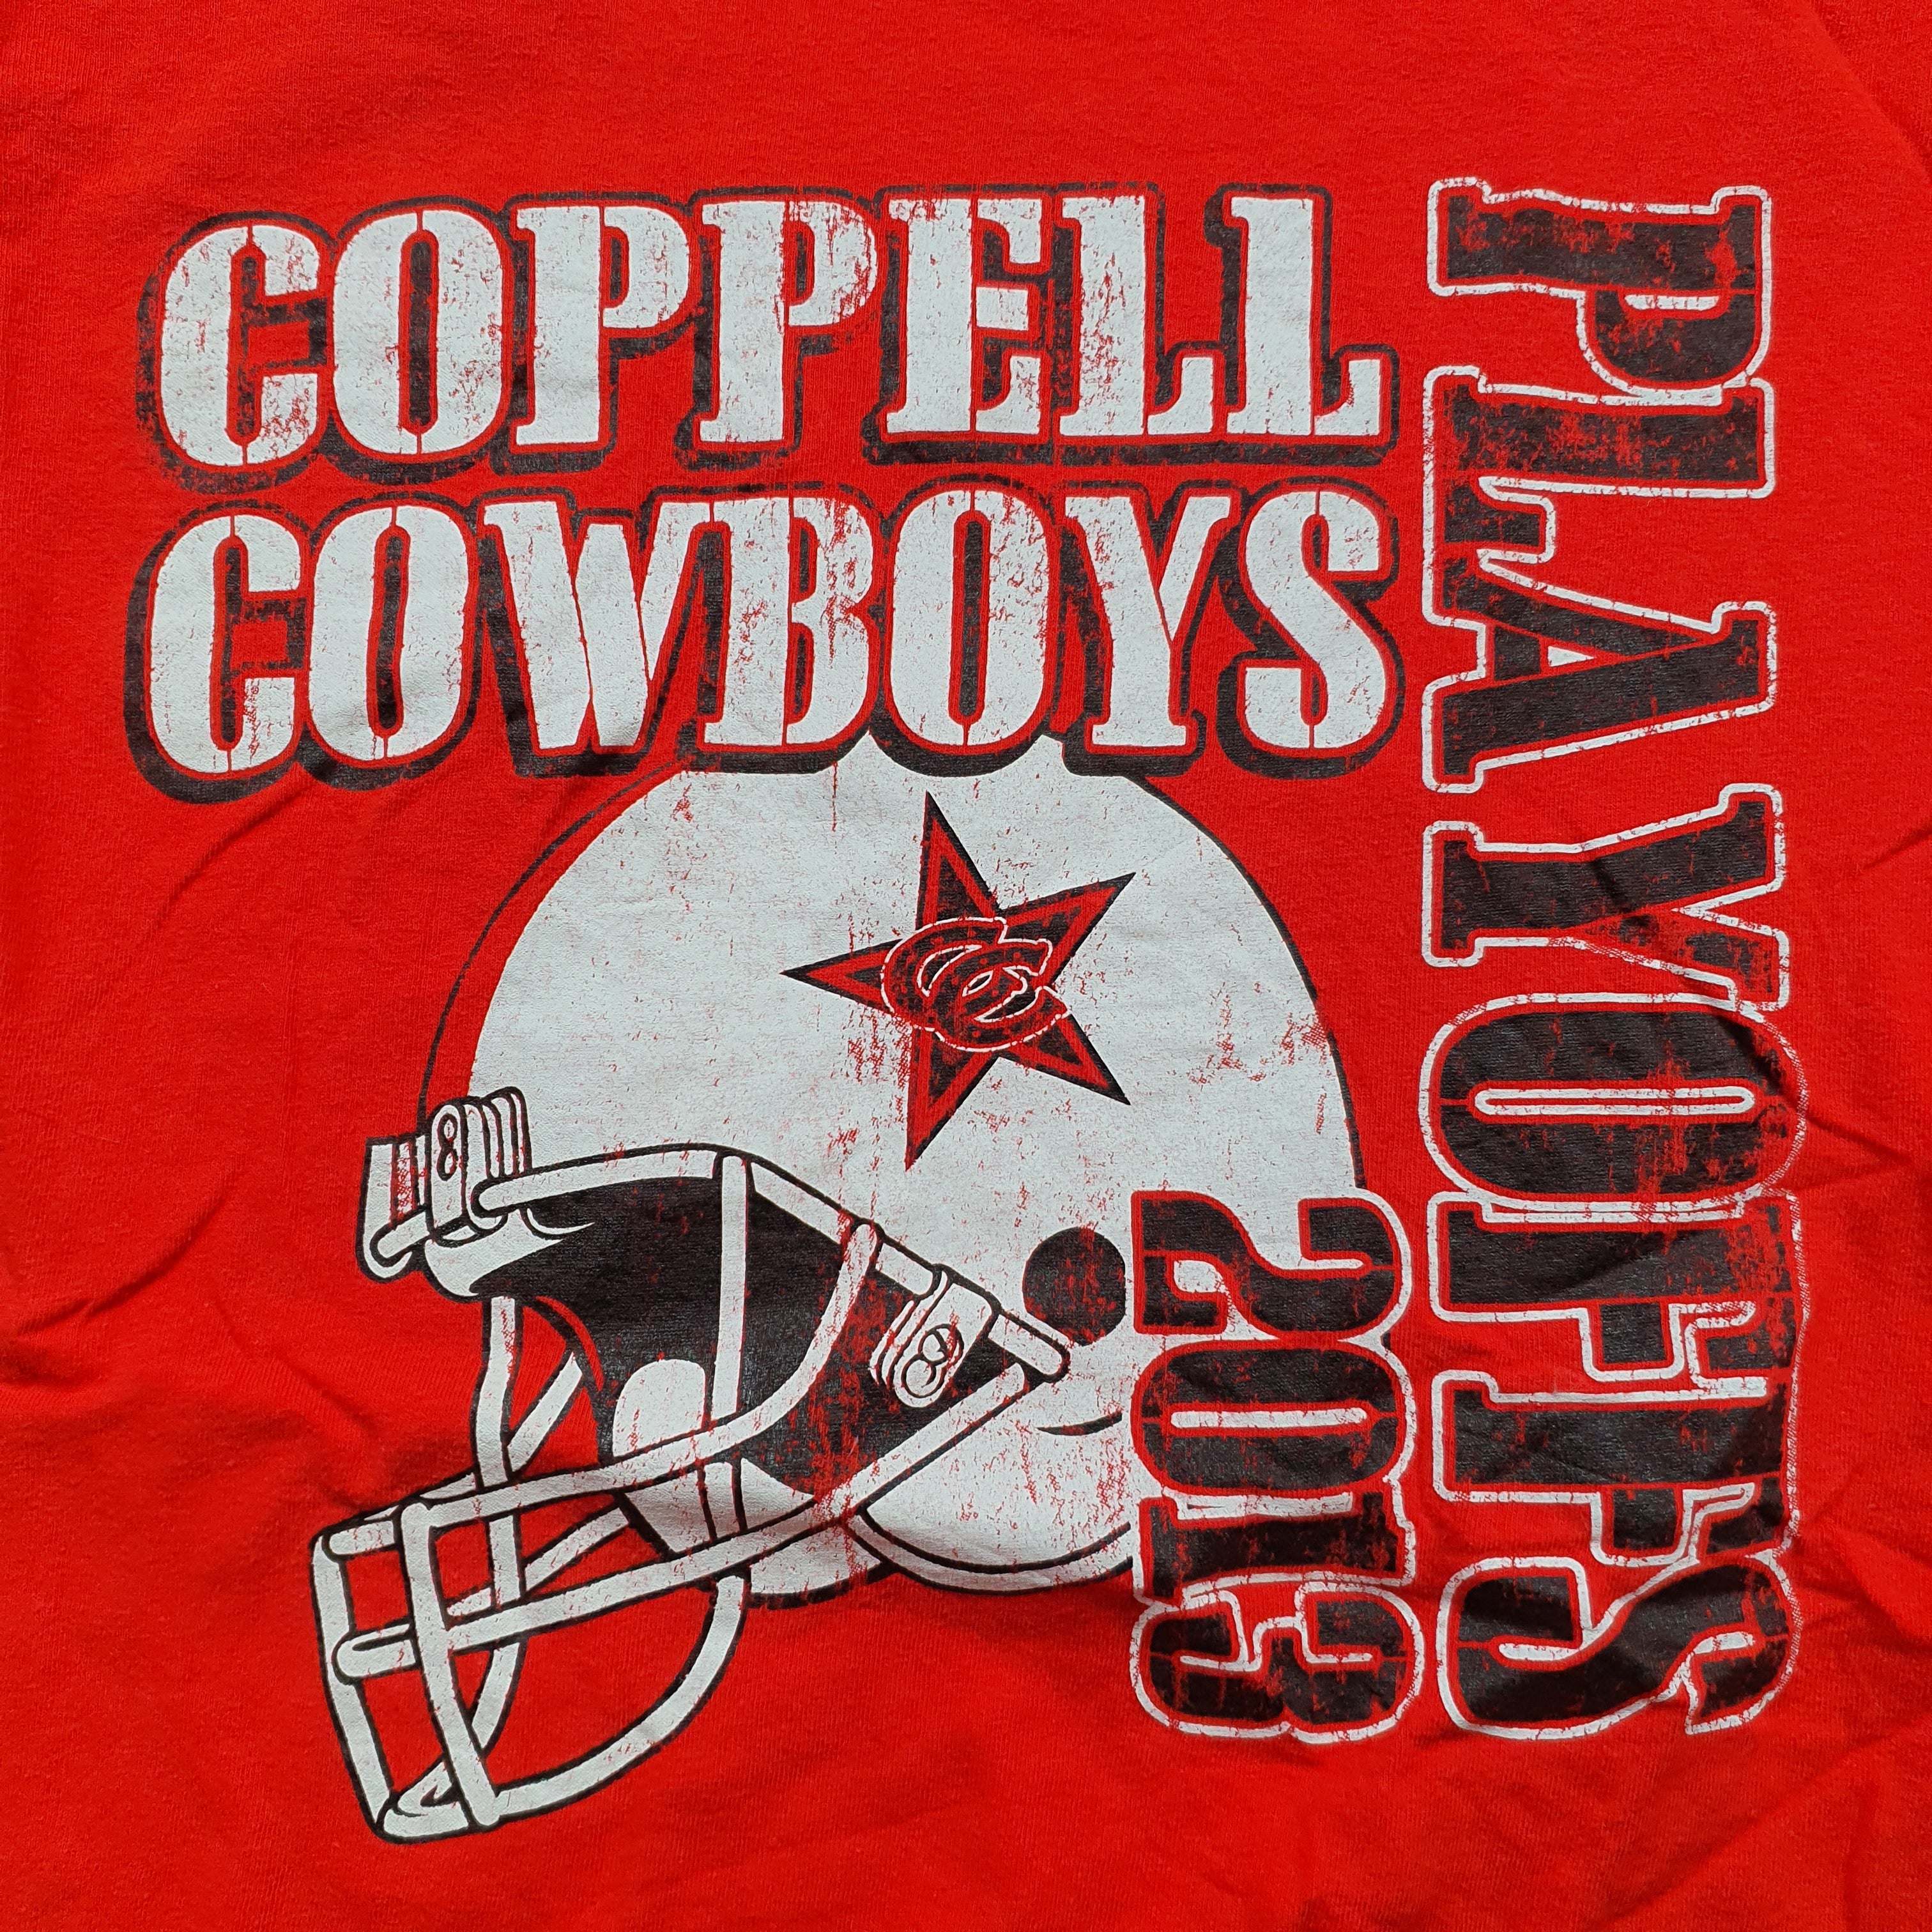 [S] Coppell Cowboys T-Shirt